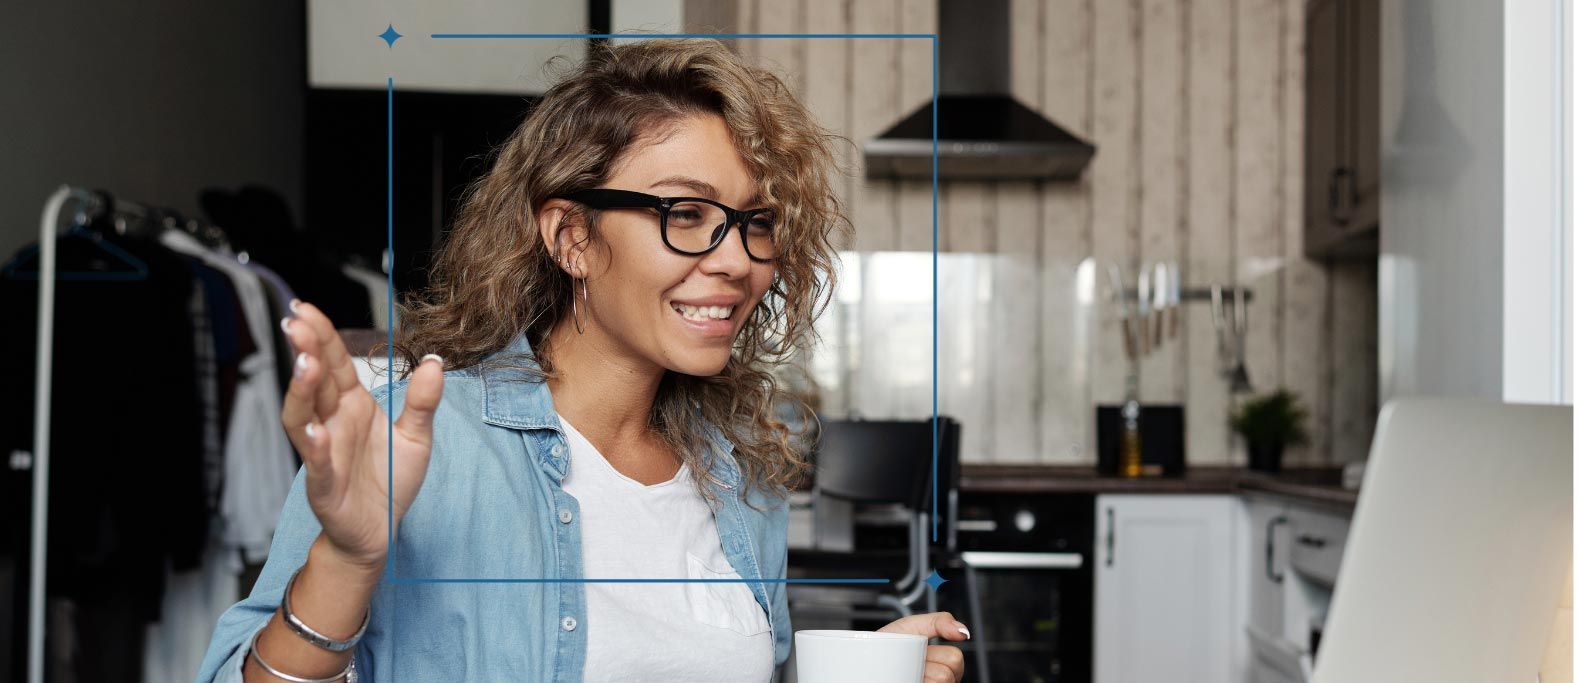 a woman wearing glasses is smiling while holding a cup of coffee